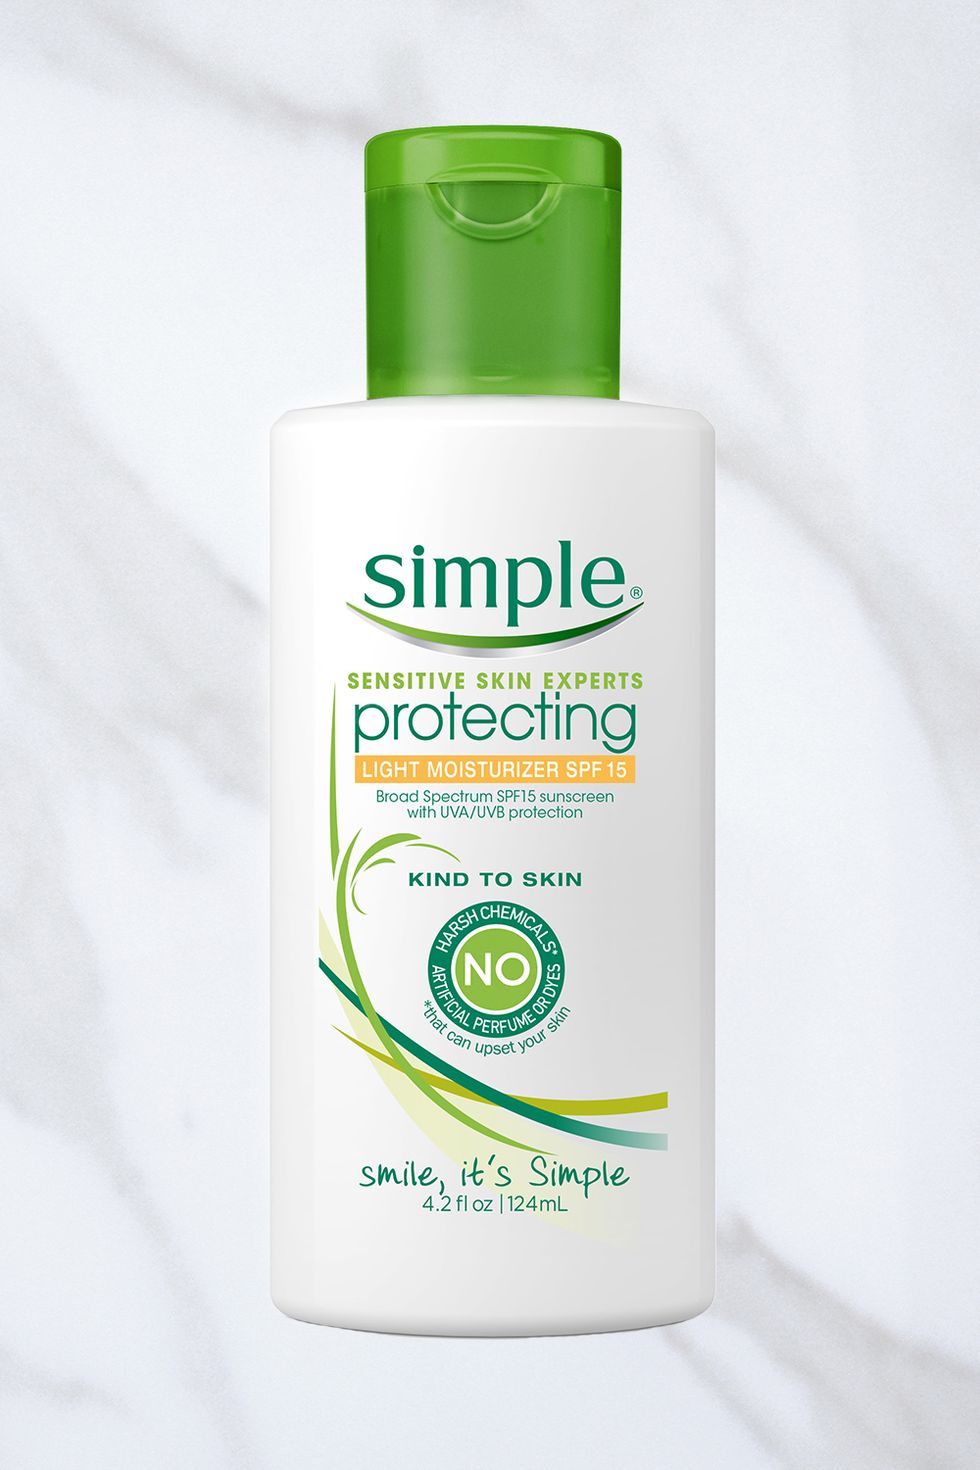 <p>A well-moisturized face will give you a silky, glowy canvas for makeup. And, if your dude is into cuddling up on the couch, you'll be ready. For non-greasy hydration, try <a href=" http://www.target.com/p/simple-protecting-light-moisturizer-spf-15-4-2-oz/-/A-14490180#prodSlot=medium_1_13&term=simple" target="_blank">Simple Skincare Protecting Light Moisturizer with SPF 15</a>, $10.</p>